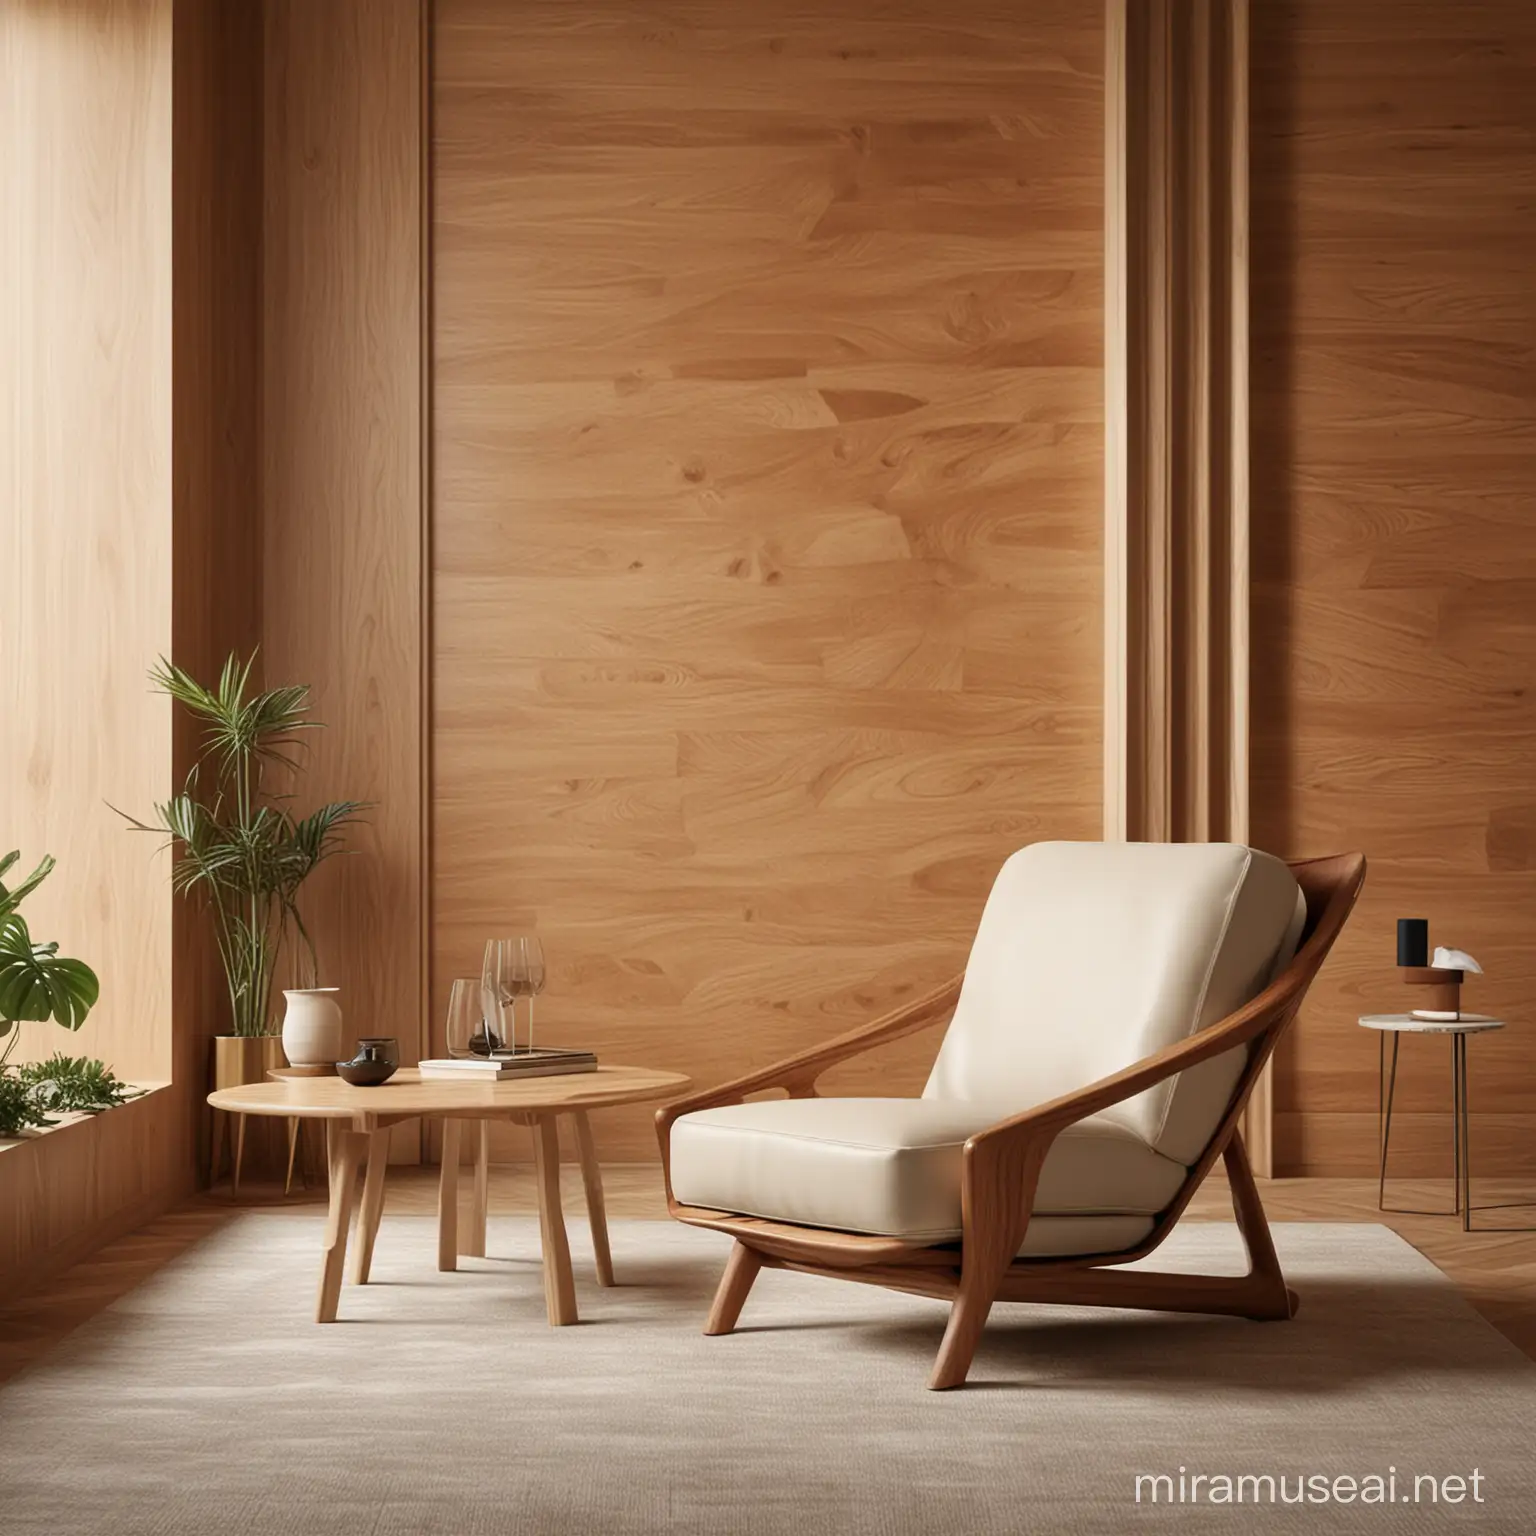 aidesign,digitalart,luxury,chair_,armchair,designfurniture,homedecoration,wooddesign,productdesign,productdaily,luxury,futuristic,modern,sofaseat,visual,visualart,digitalart,setdesign,rendertrends,renderarchitecture,architecture,architecturephotography,architecture_best,architecture_lovers,architecturestudents,architecturaldigest,architecturevisualization,renderlovers,interiordesignerslife,interiordesigninspiration,interiordesigntrends,interiordesignblog,interiordesignersofinstagram,interiordesignerlife,interiordesignblogger,interiordesignlover,interiordesignmag,interiordesignaddict,architectureape,finearchitecture,architecturetravel,architecturebuilding,midjourney,artdeco,interiordesign,homedecor,design_,decoration,contemporary,wood,aiart,midjourney